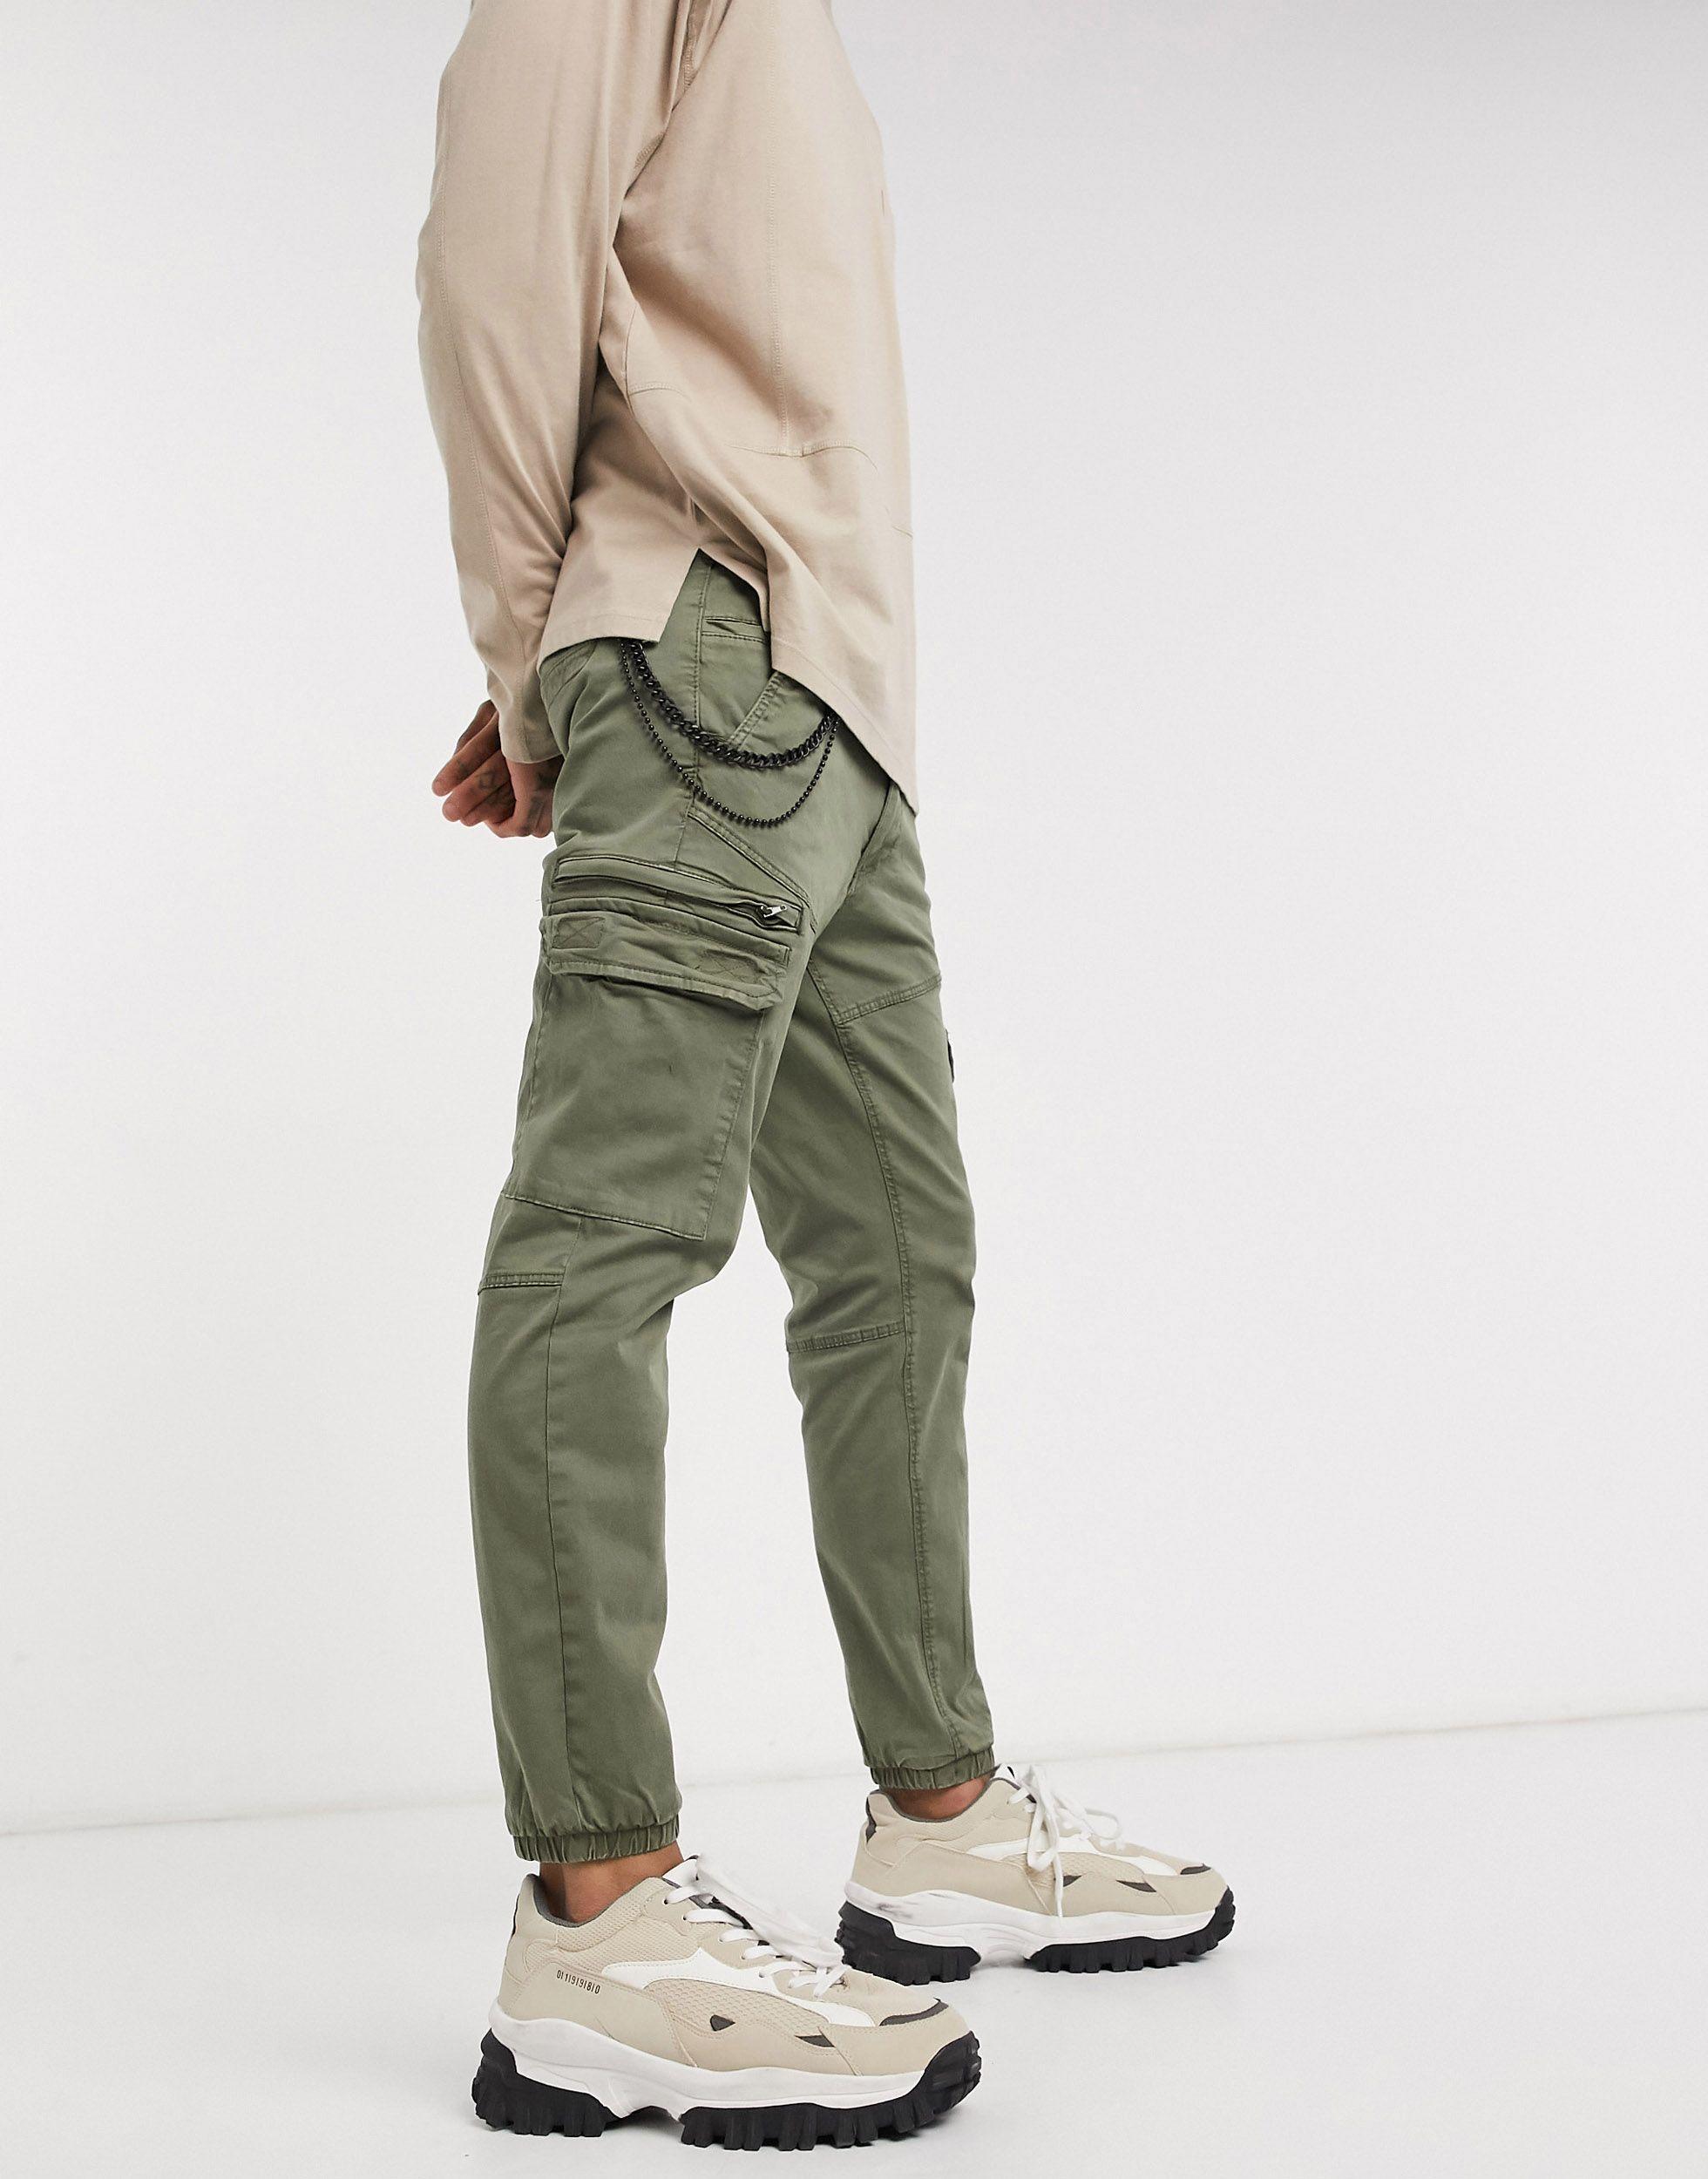 Pull&Bear Cuffed Cargo Pant With Chain in Green for Men - Lyst